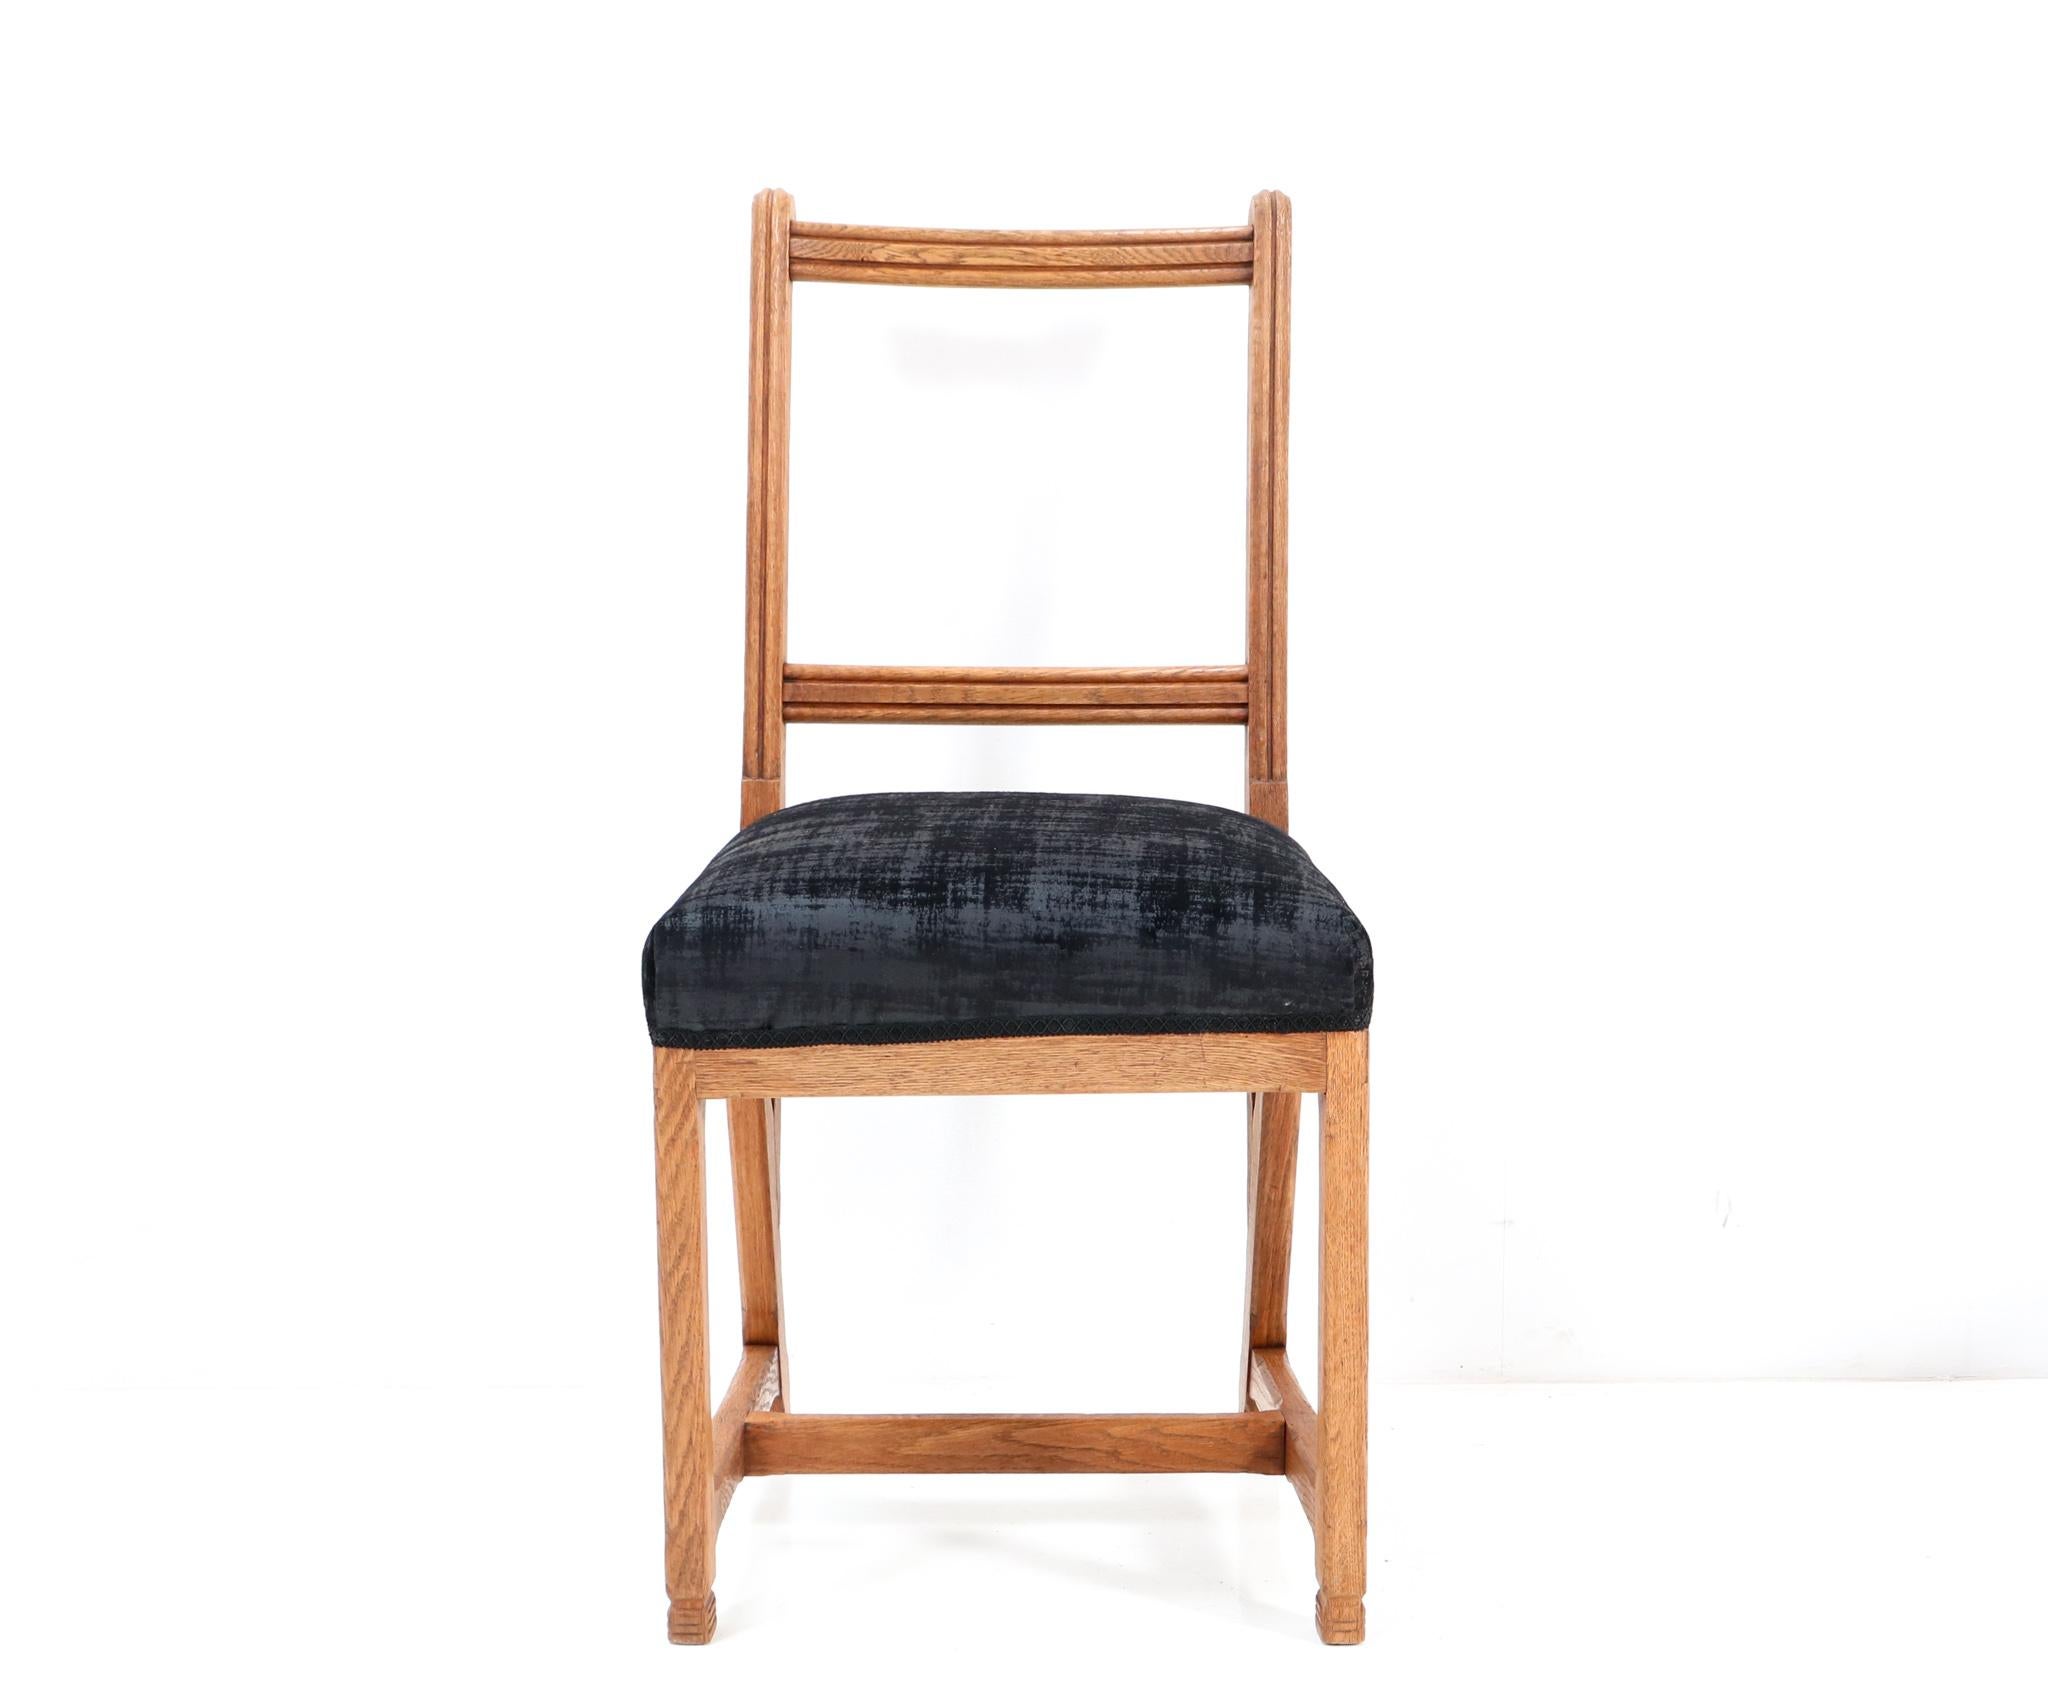 Twelve Oak Arts & Crafts Chairs by Hendrik Petrus for the University of Leiden For Sale 2